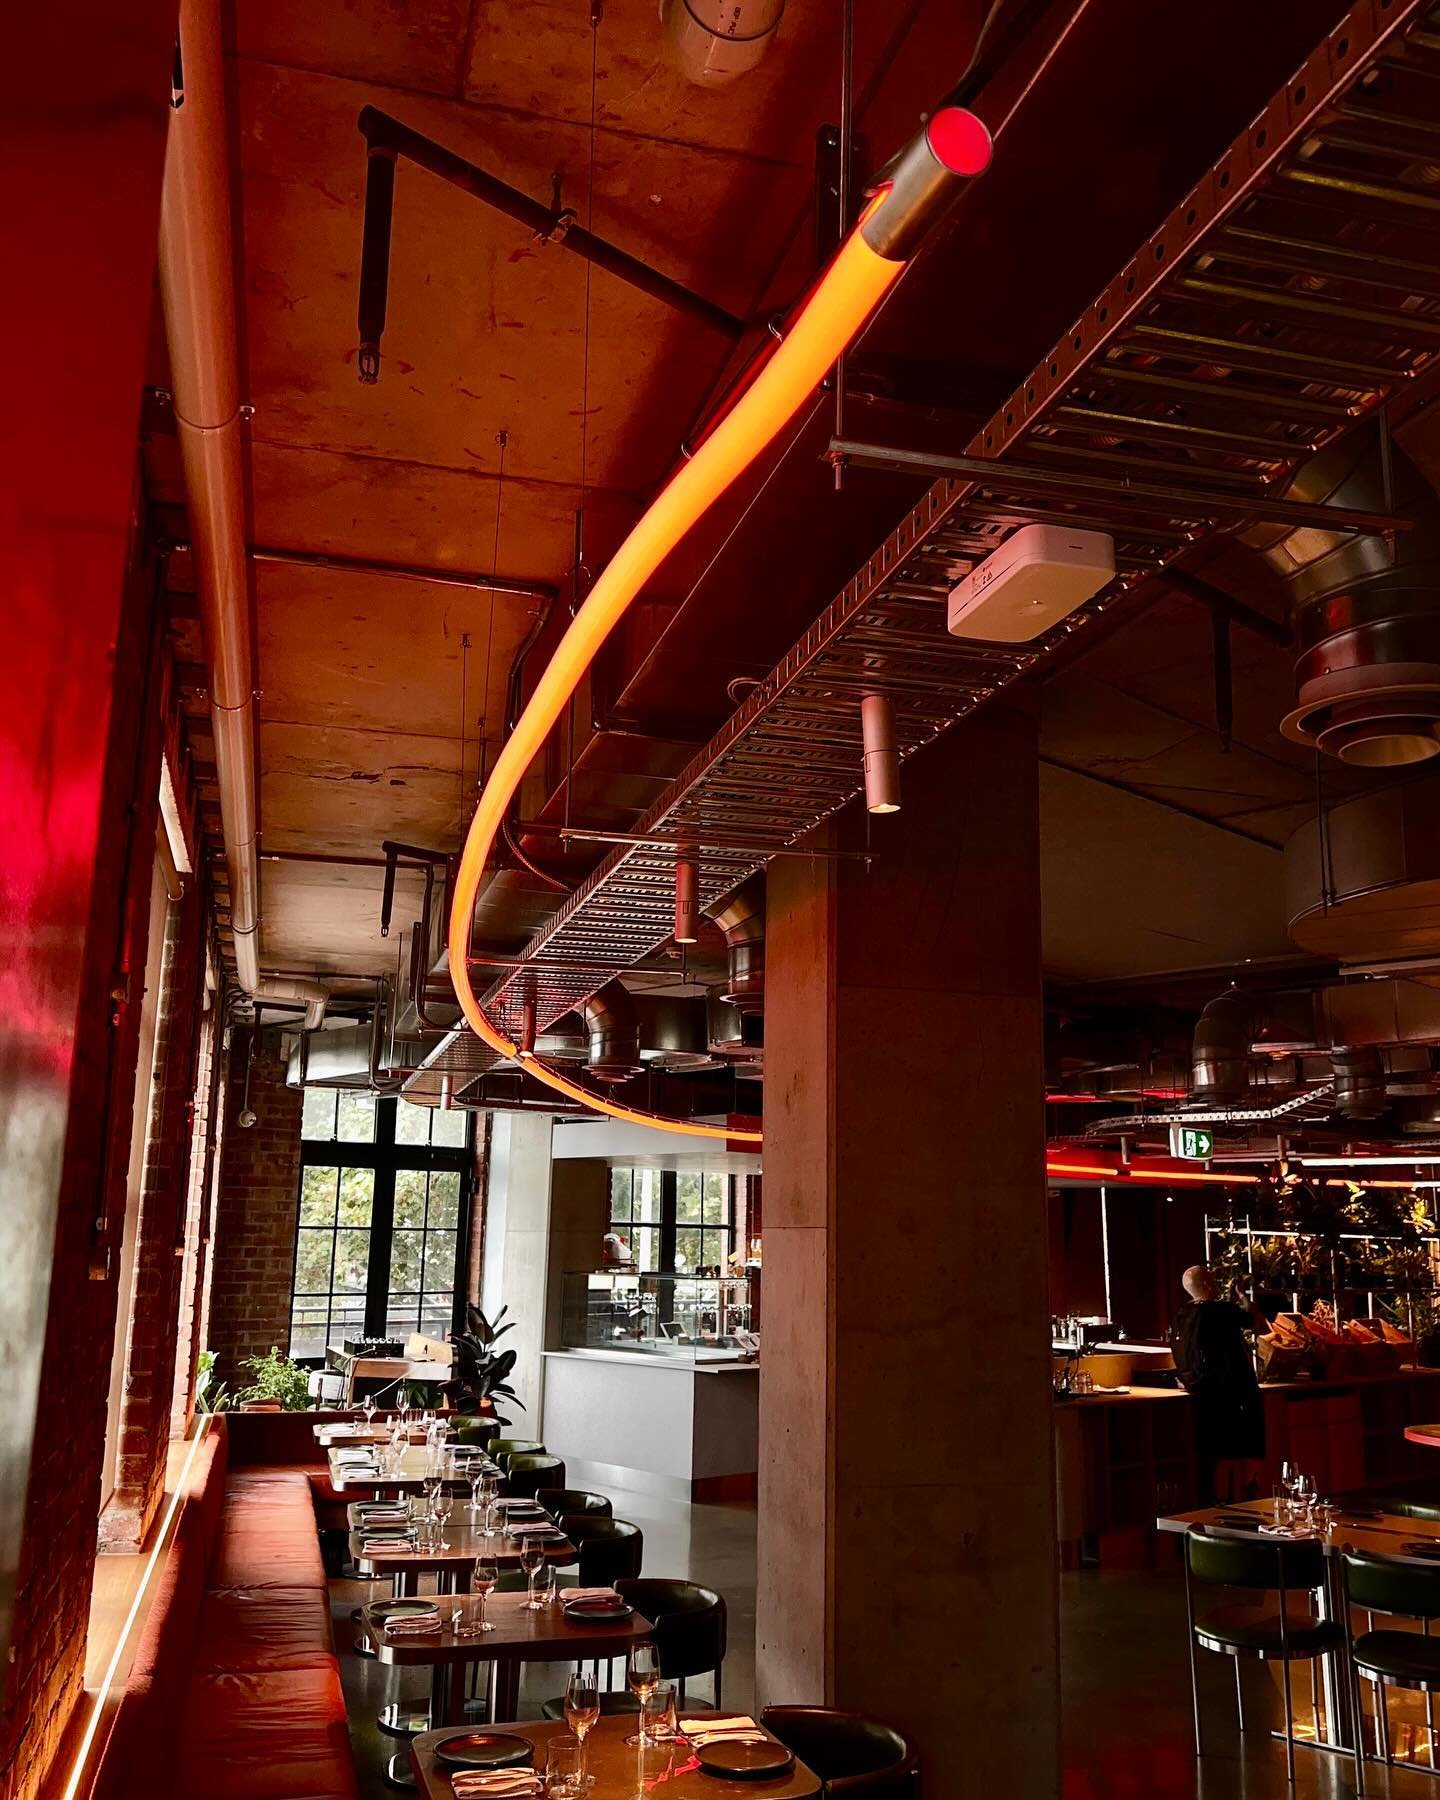 The ARC, a 20-meter streak of vibrant red, zips around @visit_bricklane one of Melbourne&rsquo;s best-kept secrets &ndash; an expansive second-storey restaurant and bar, with panoramic views overlooking the iconic Queen Victoria Market @vicmarket. 

